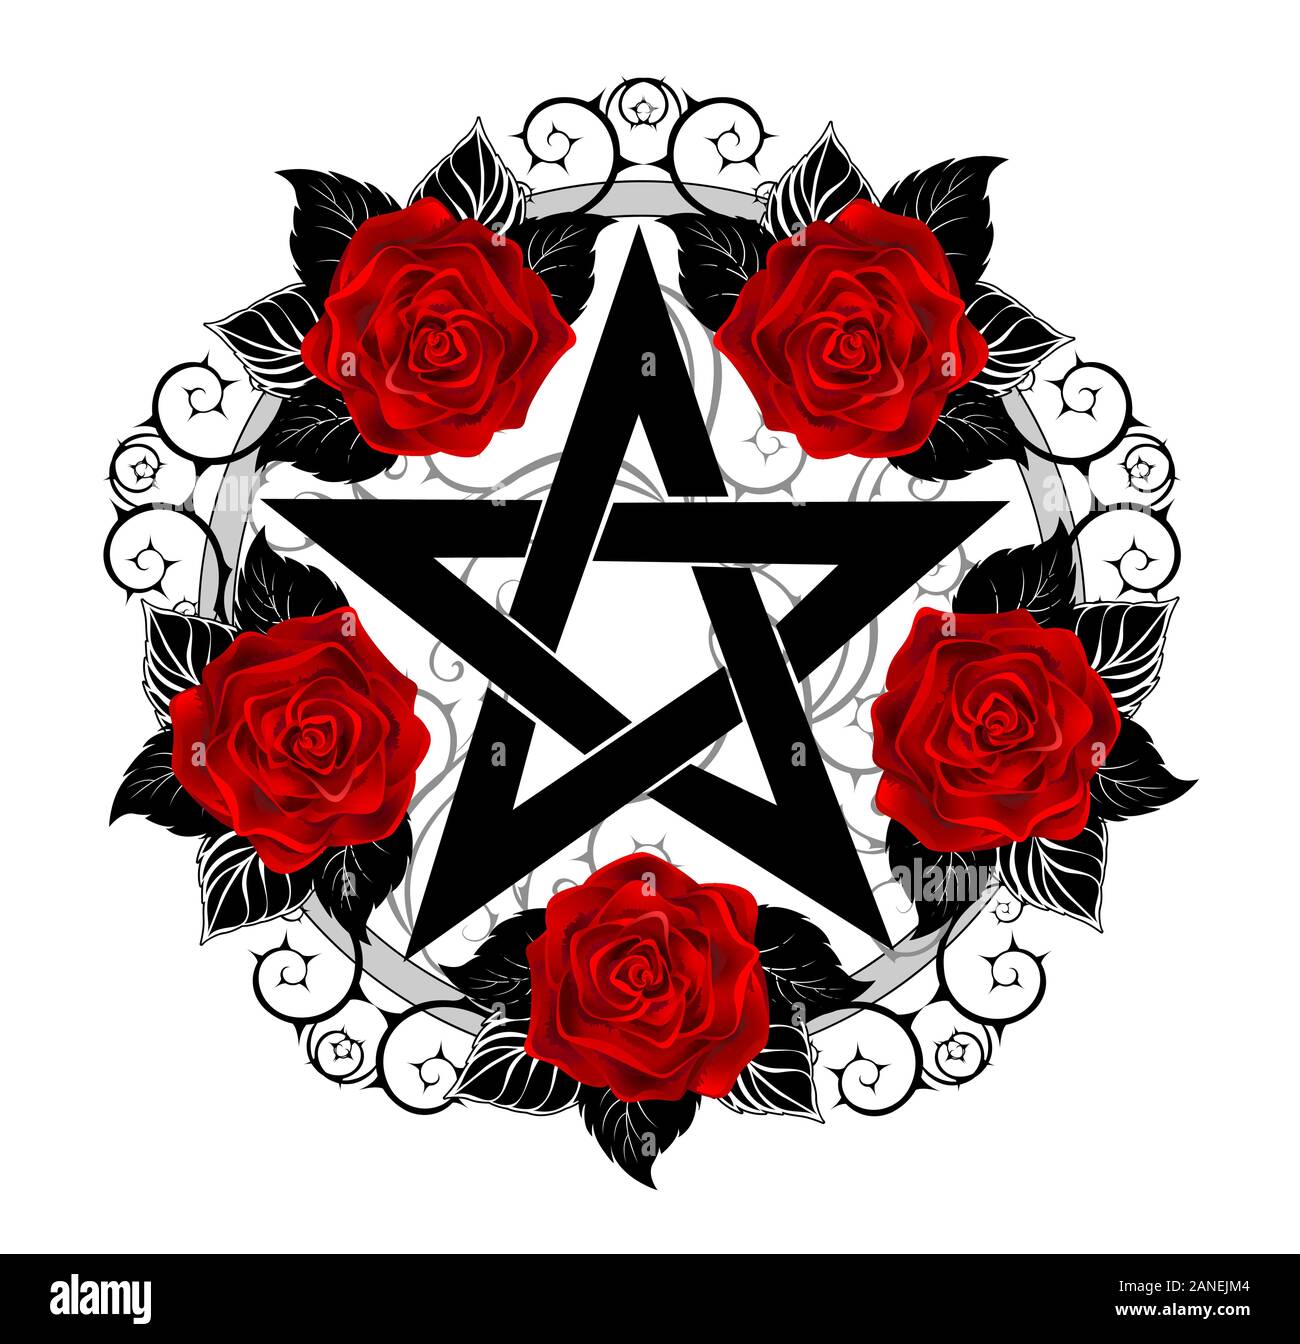 Black pentagram with pattern, decorated with blooming, red roses with leaves on white background. Tattoo style. Stock Vector